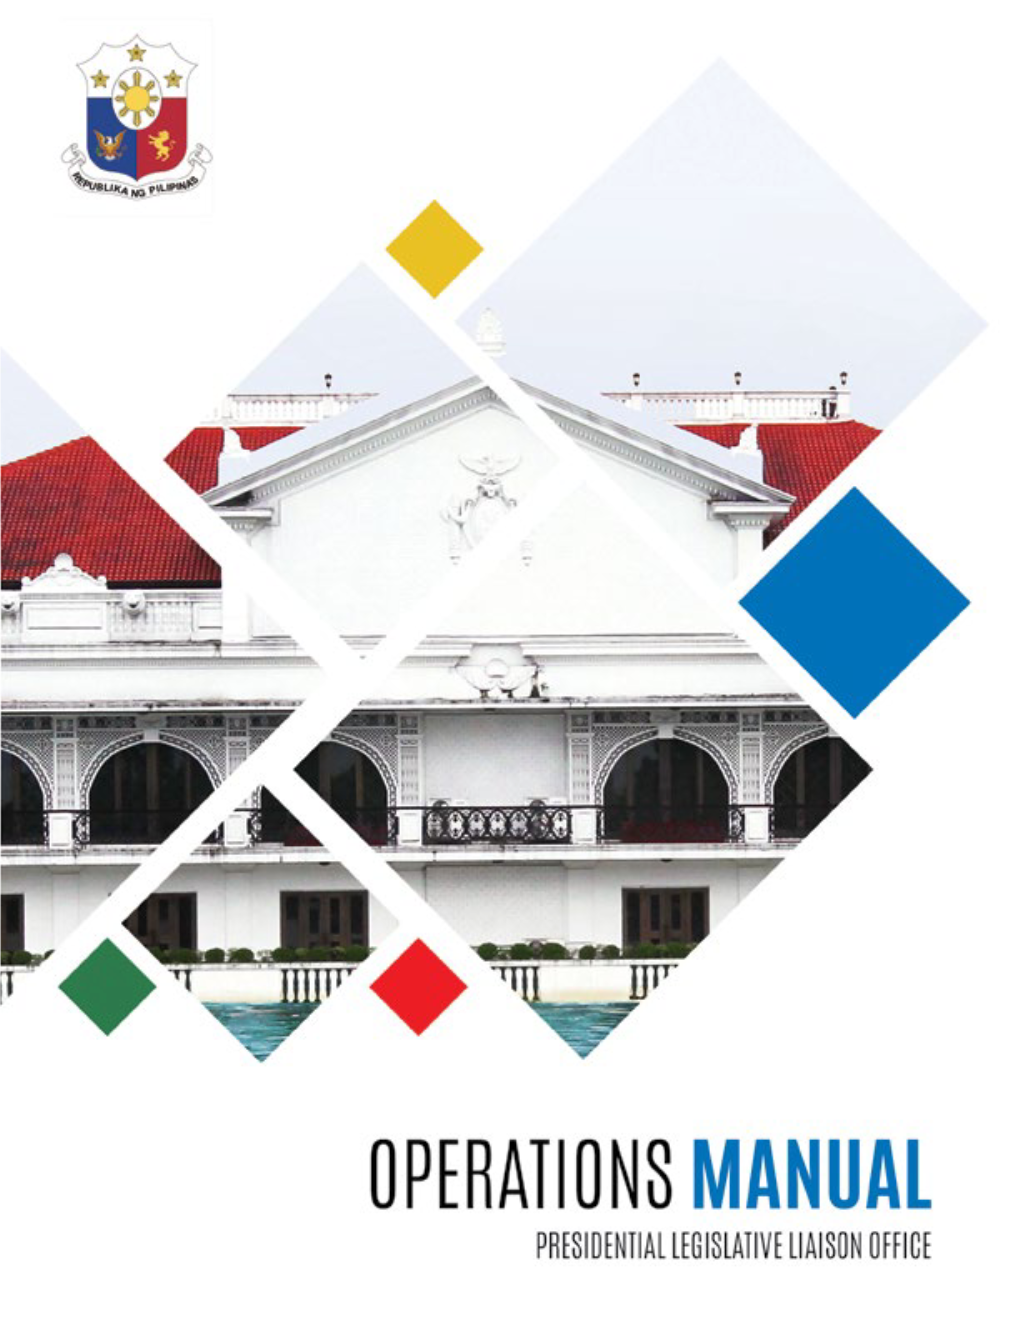 Quality Management System / Agency Operations Manual